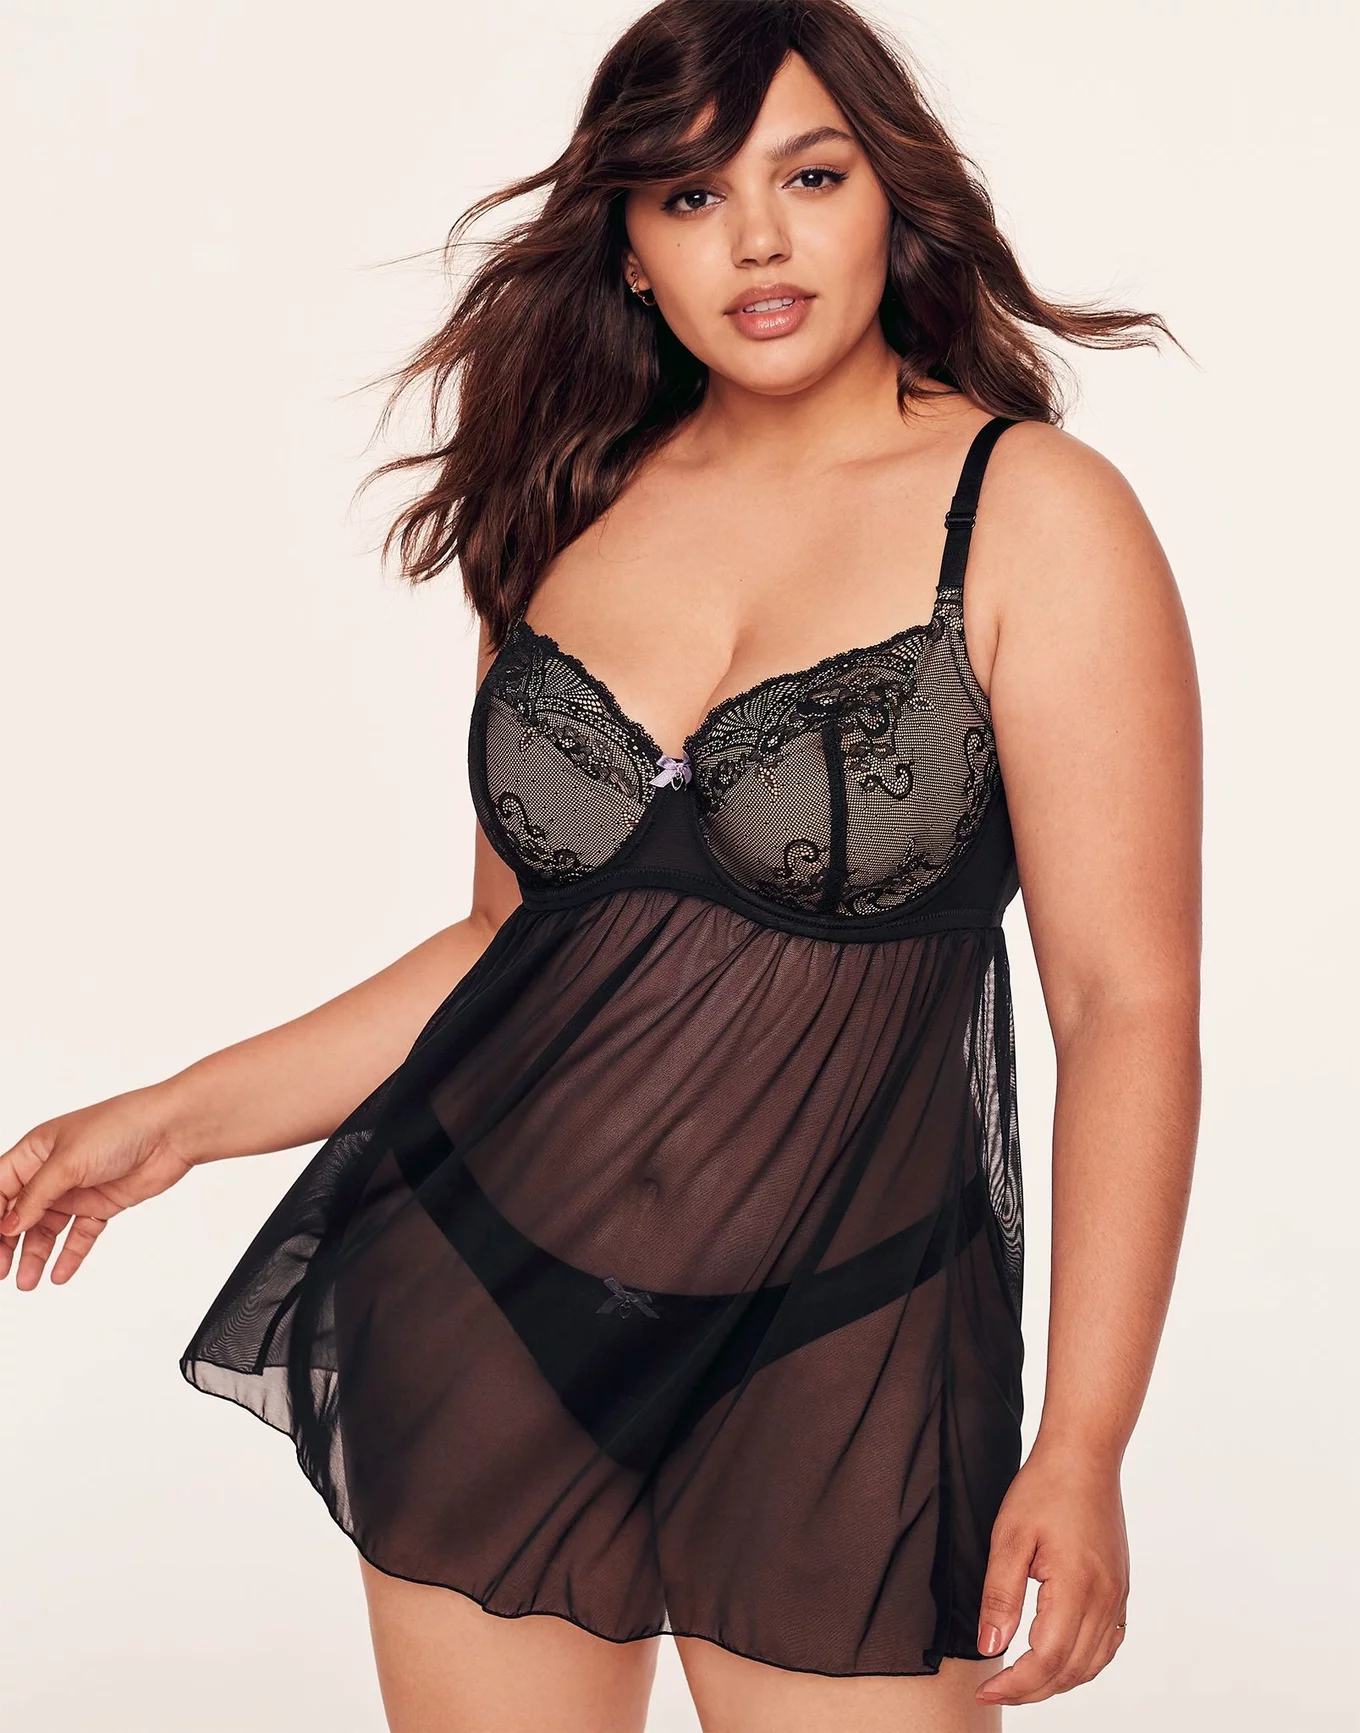 Your First Look at the Plus Size Lingerie at Adore Me